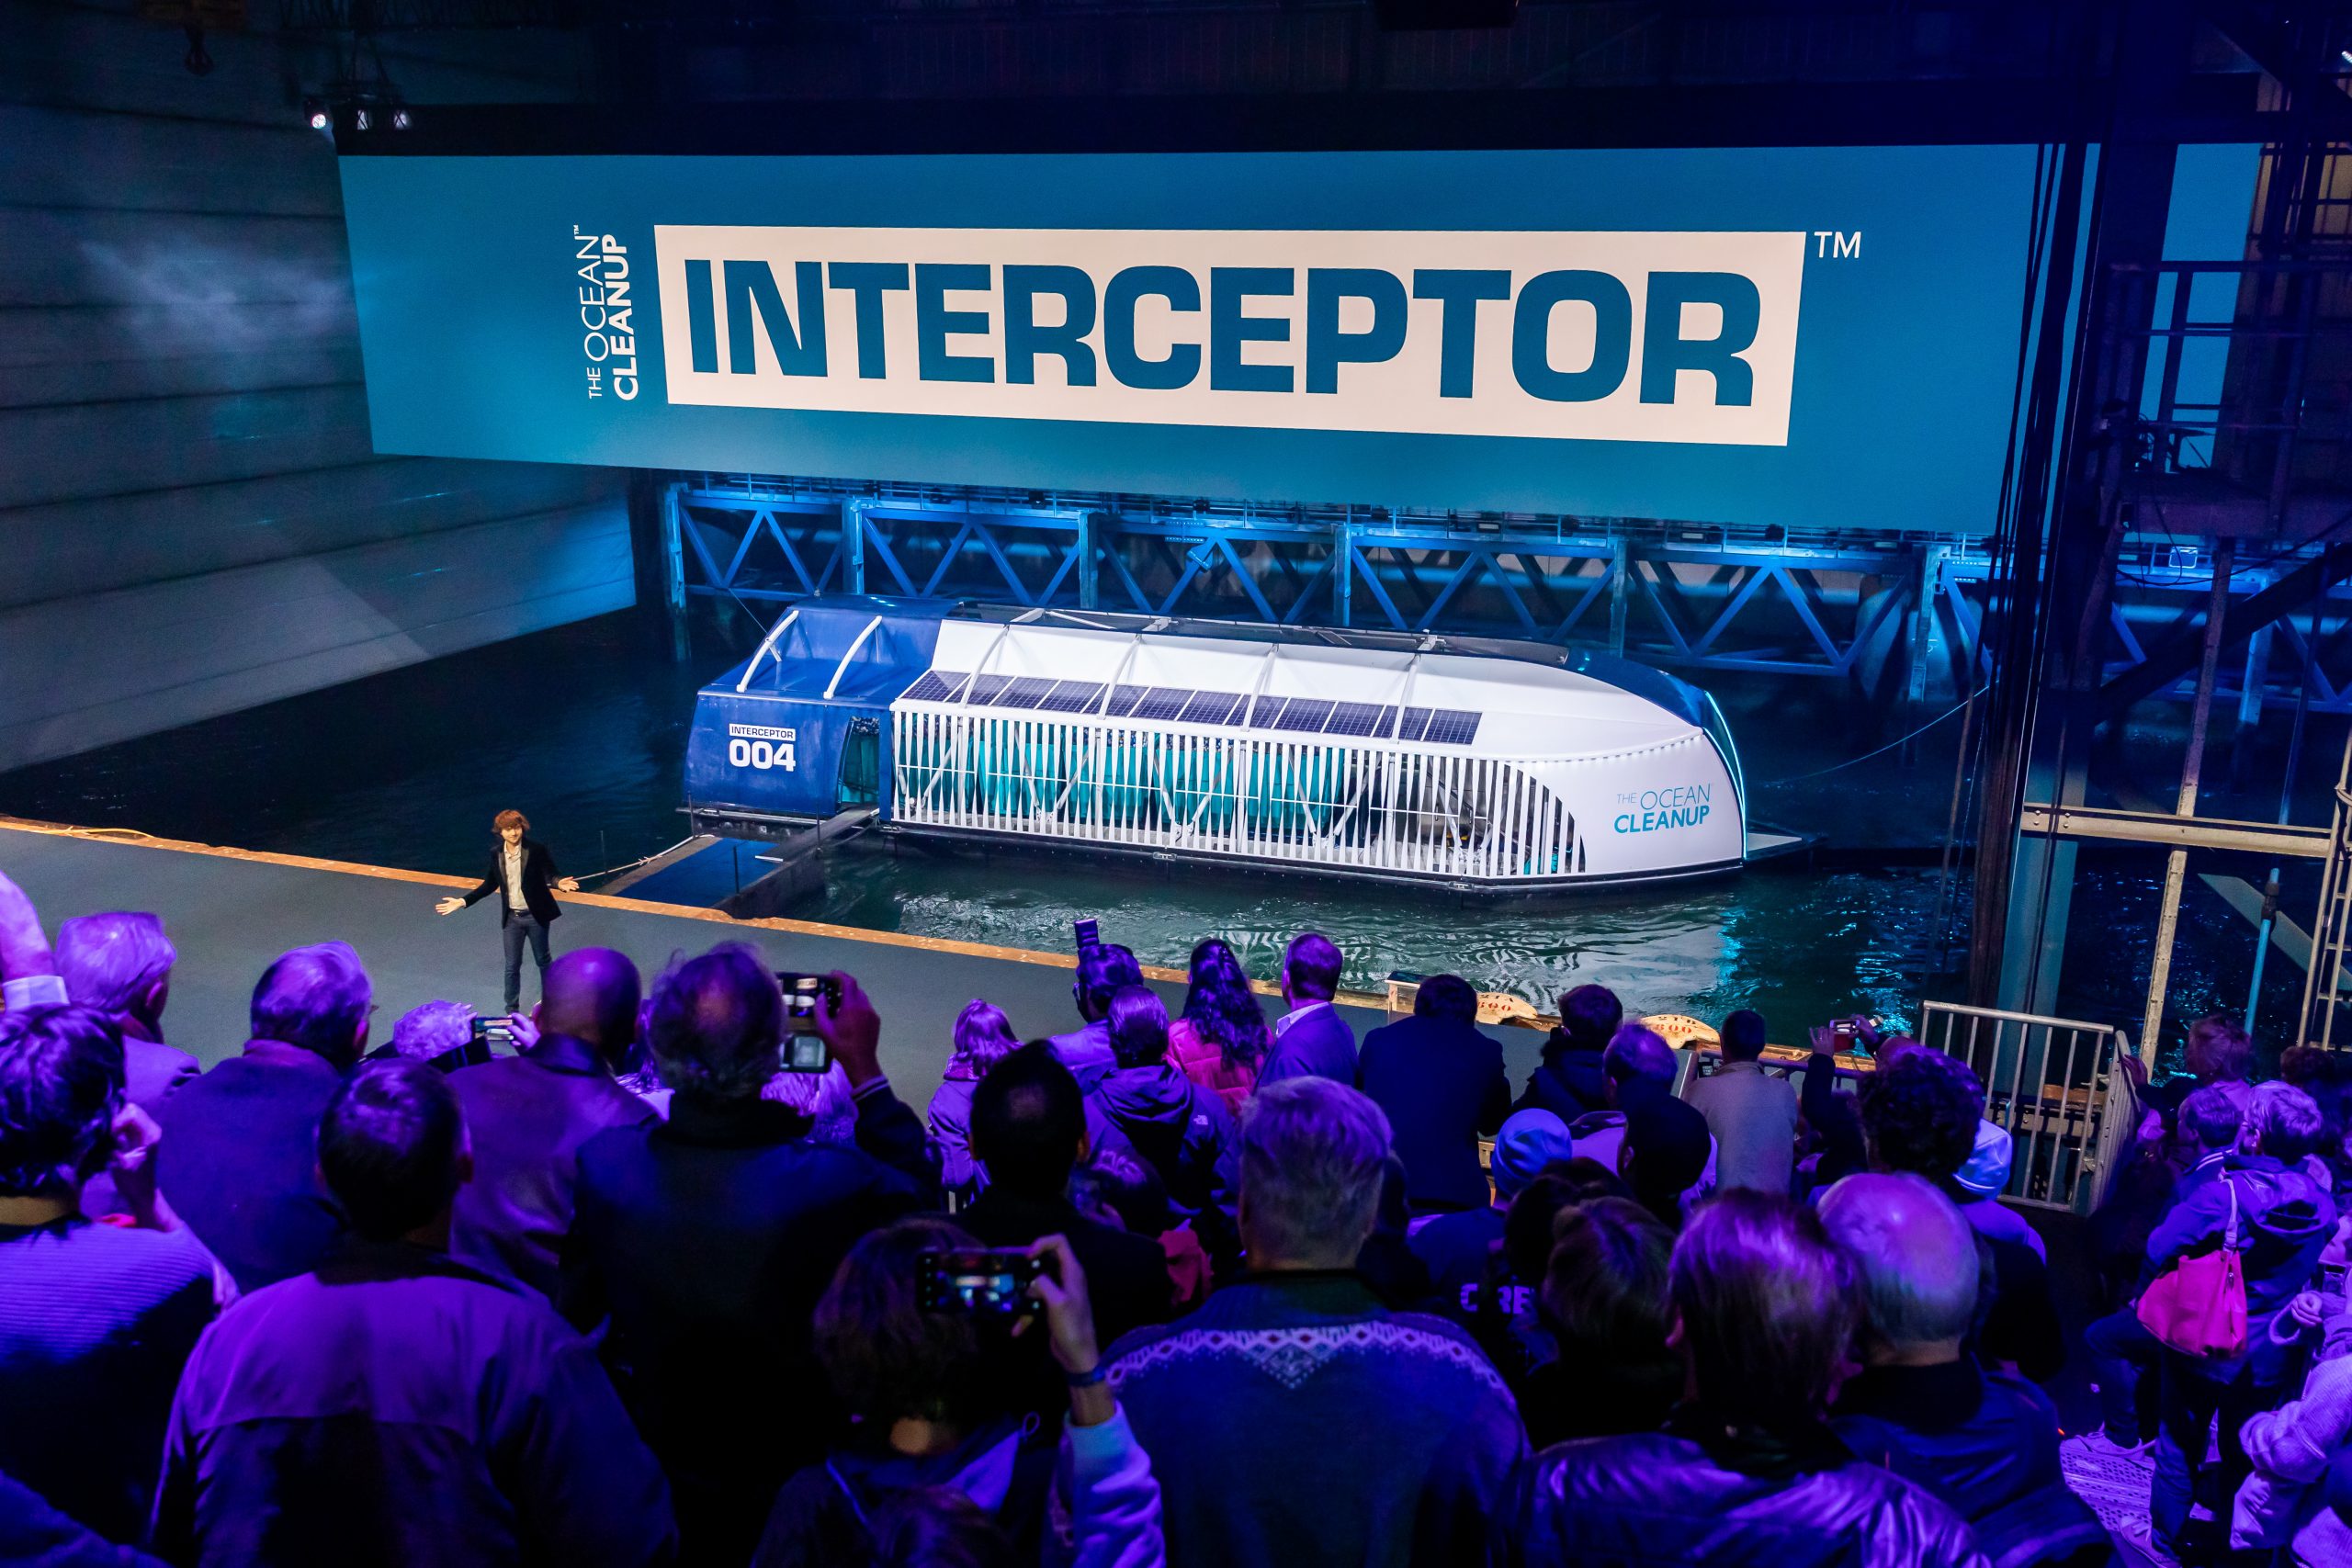 Rotterdam, October 26, 2019 – The Ocean Cleanup unveils the Interceptor, the first scalable river cleanup technology.